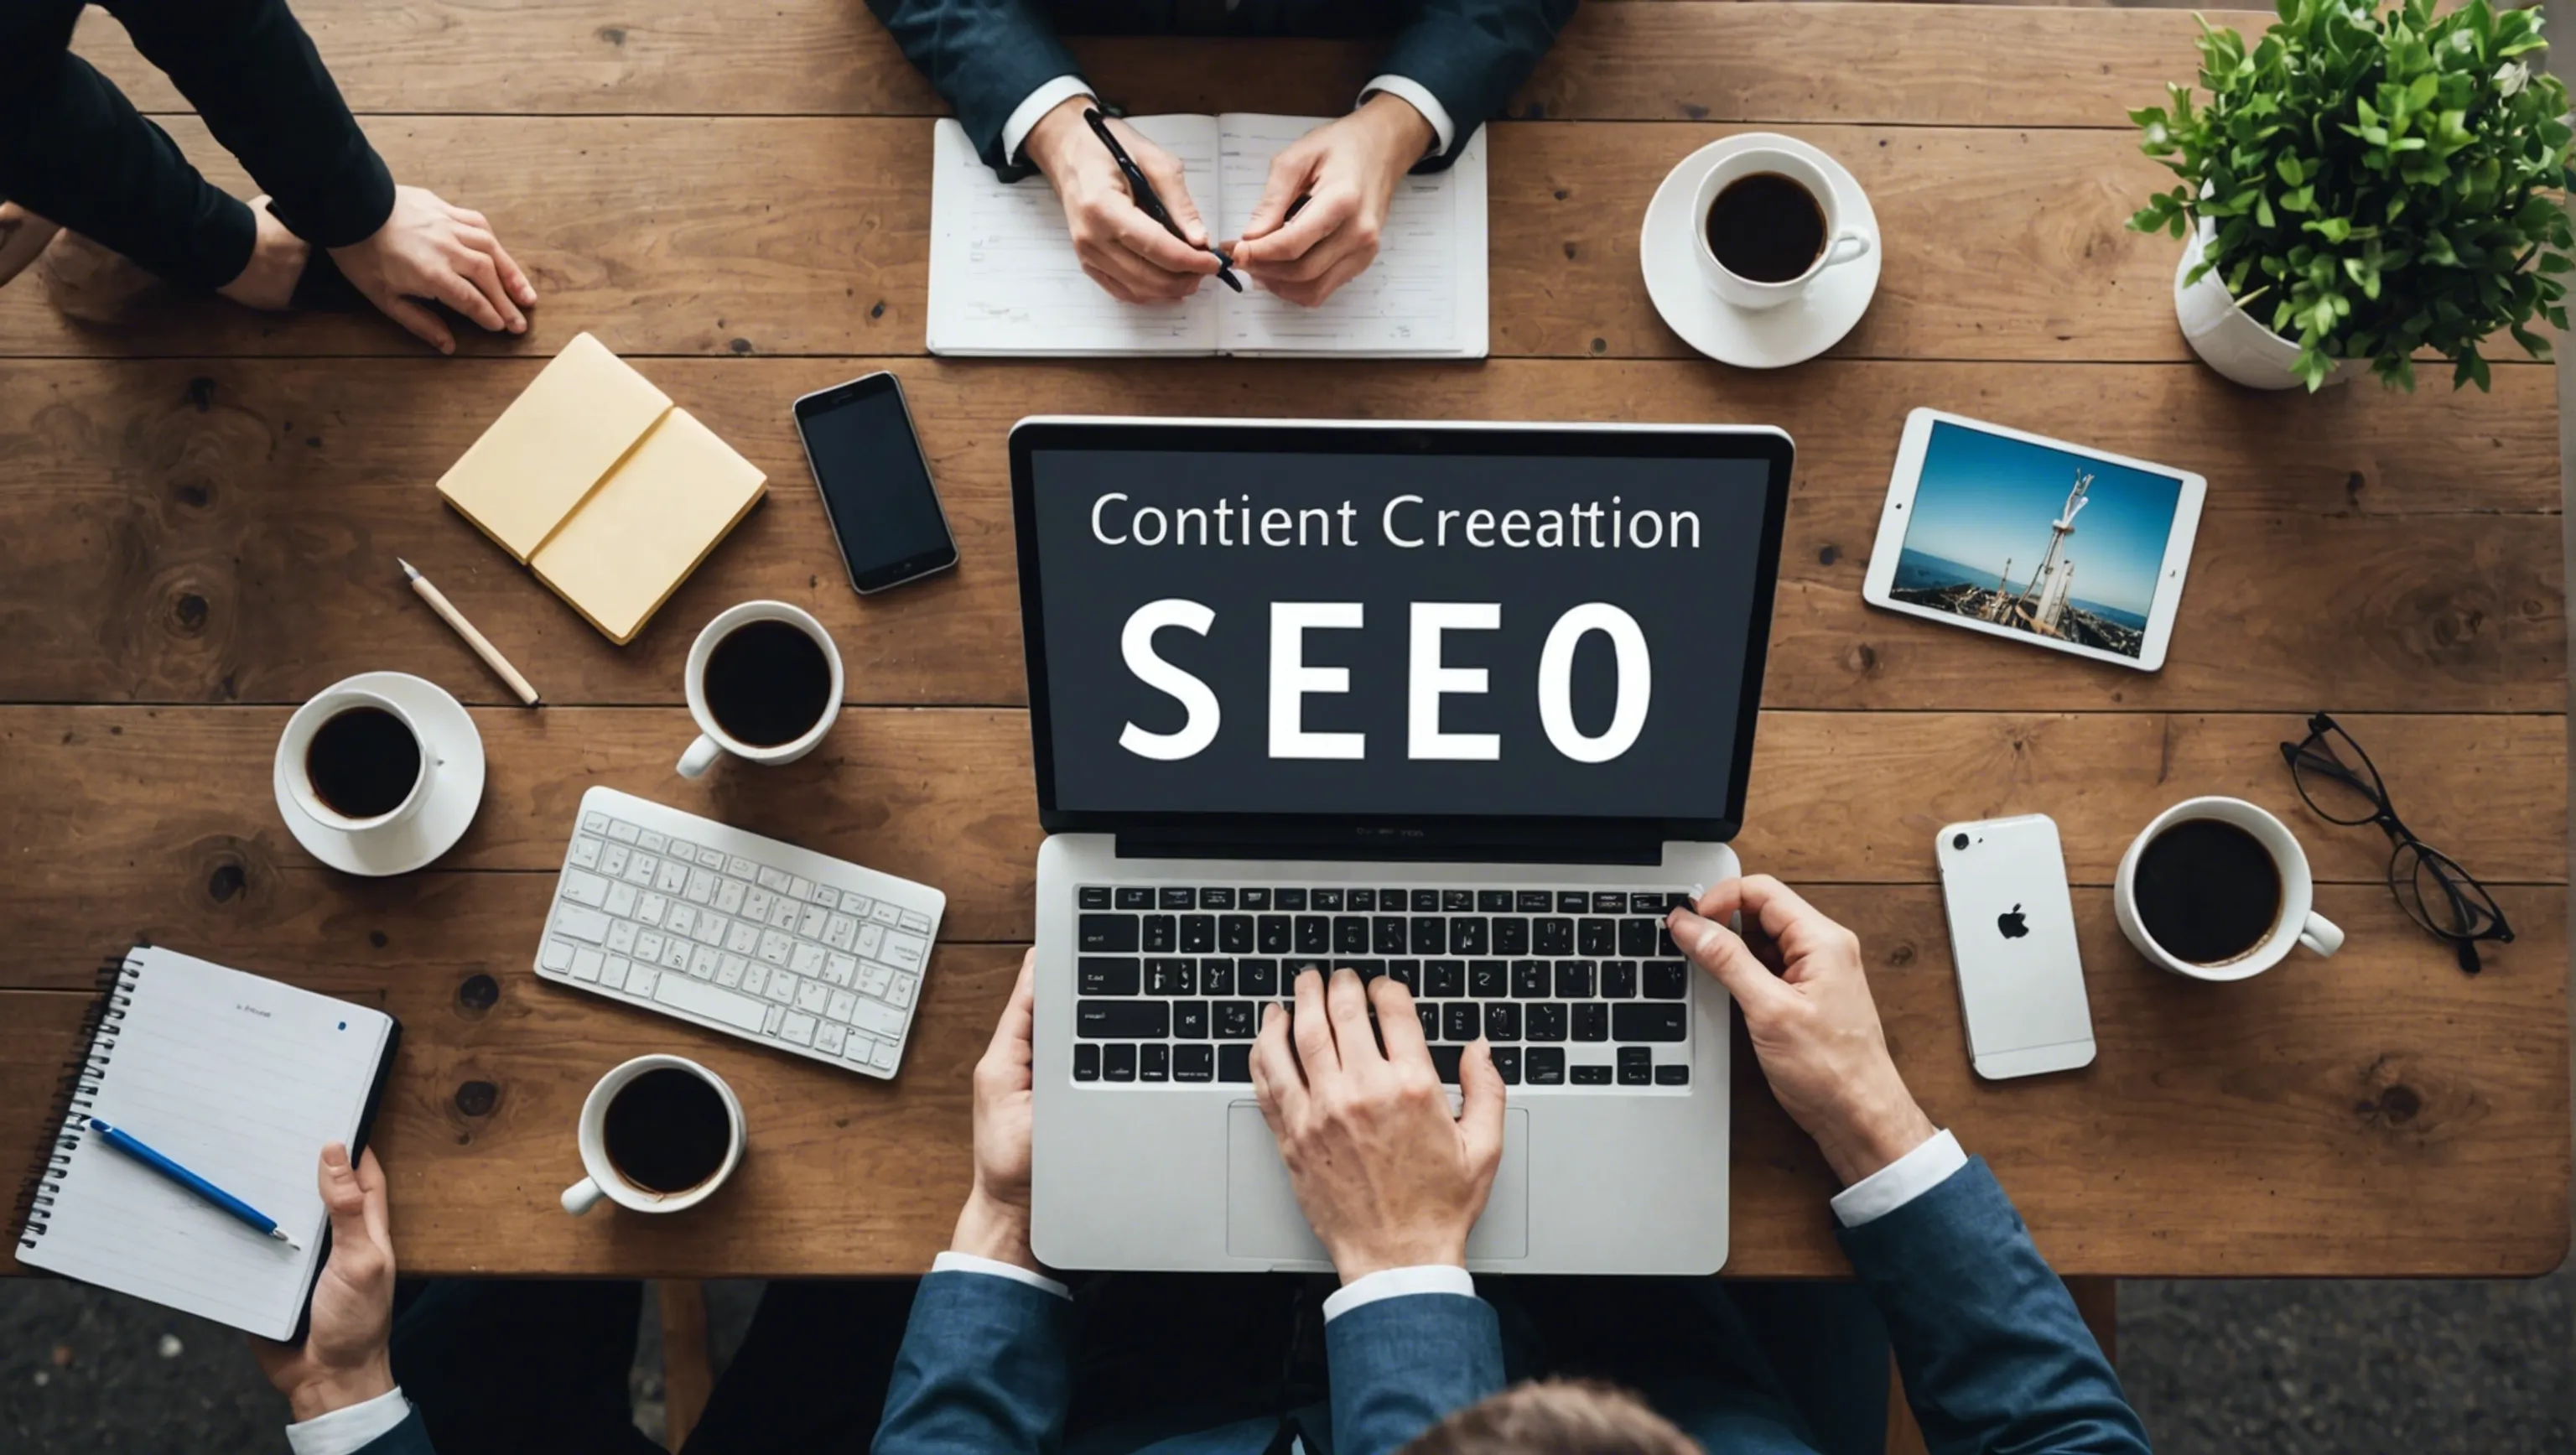 Content creation for SEO: A guide for marketing professionals